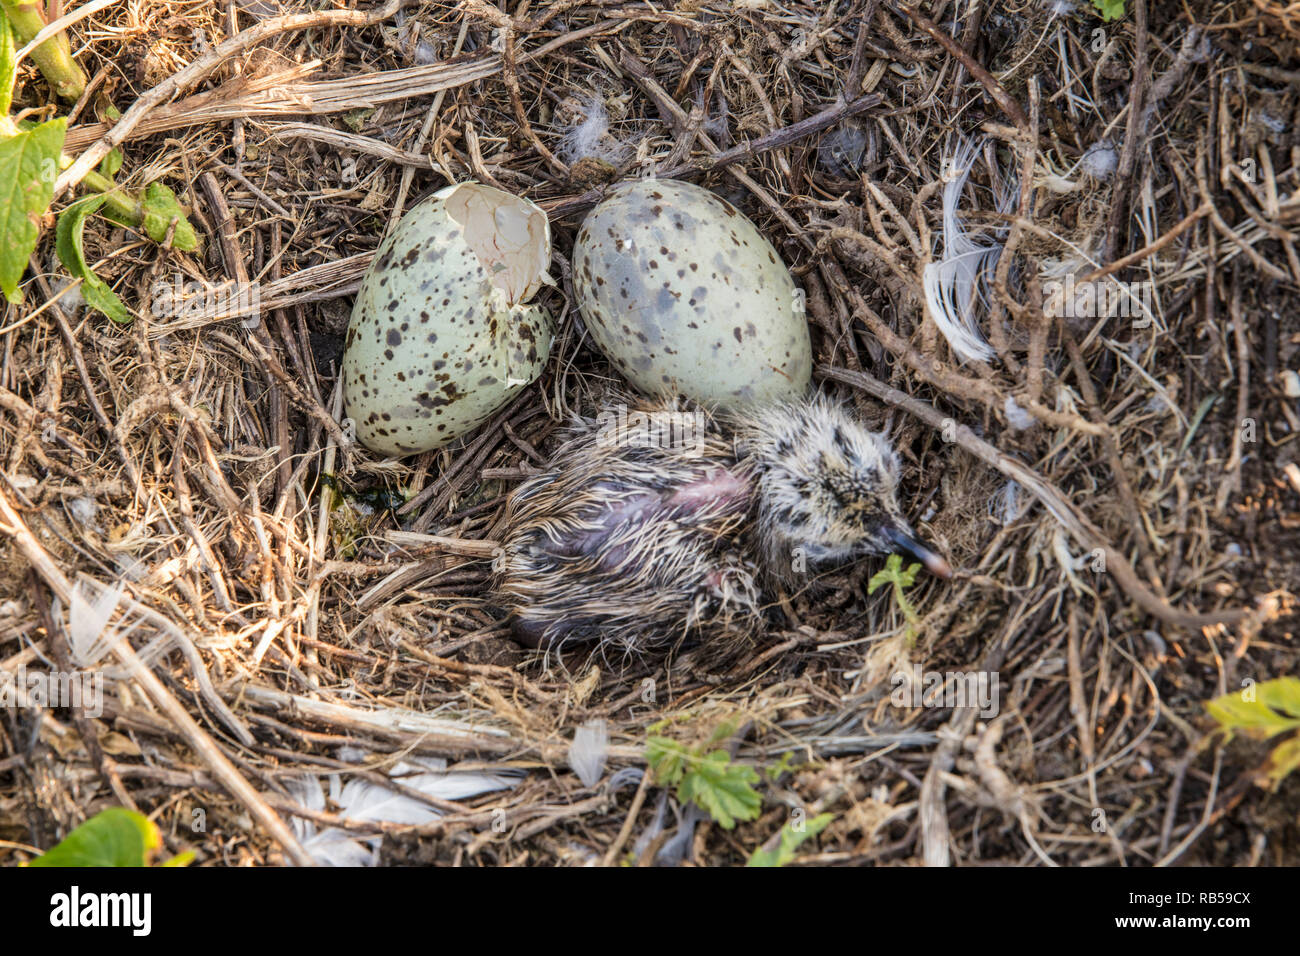 The Netherlands, Amsterdam. IJburg district. Nest with chick, young and eggs of gull. Stock Photo